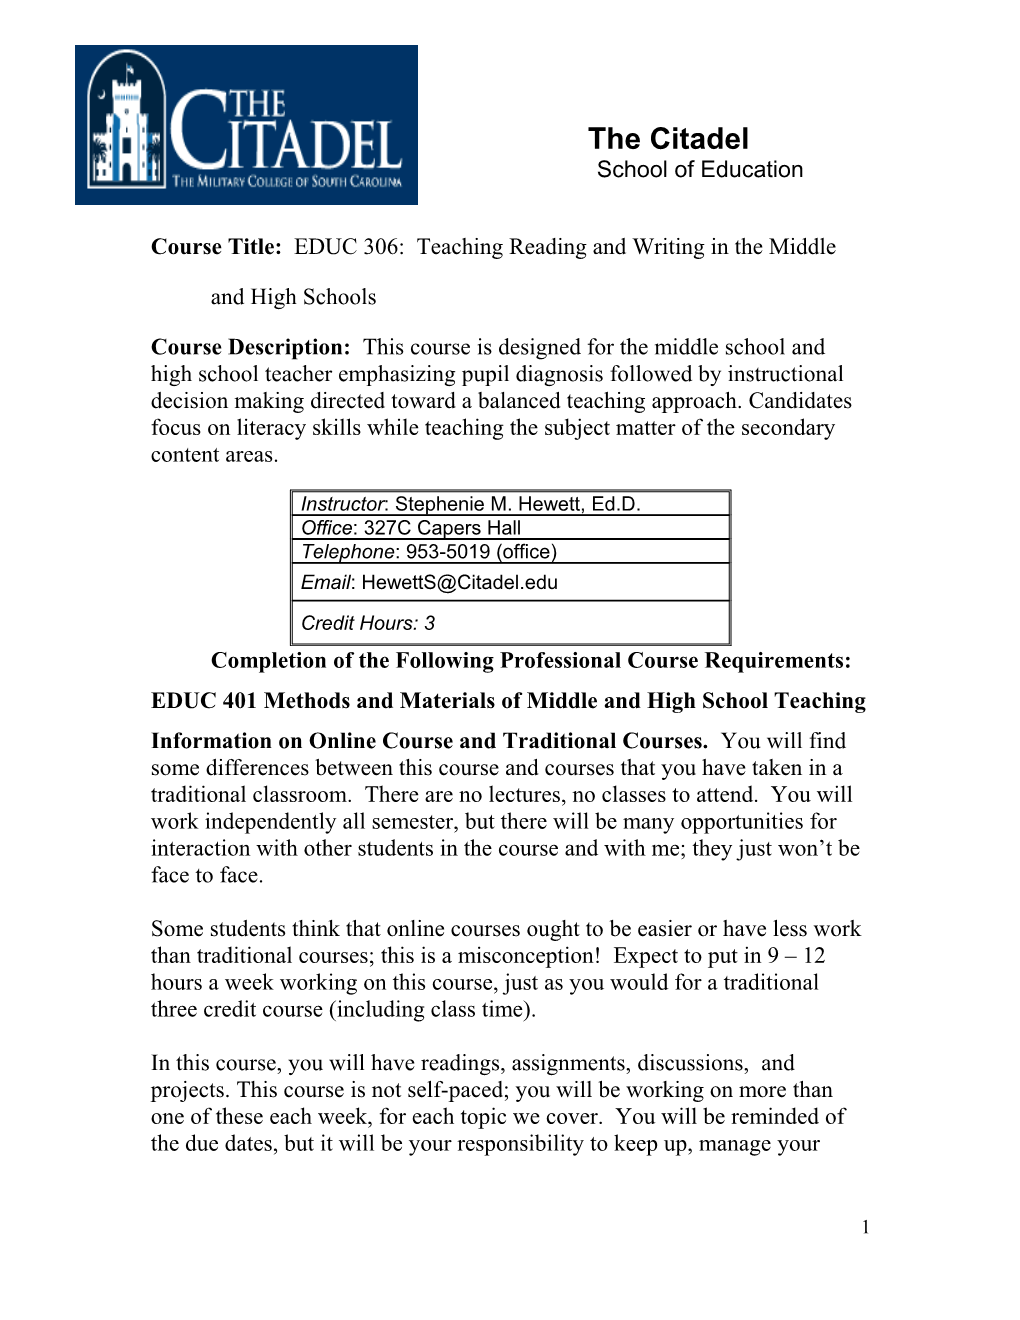 Course Title: EDUC 306: Teaching Reading and Writing in the Middle